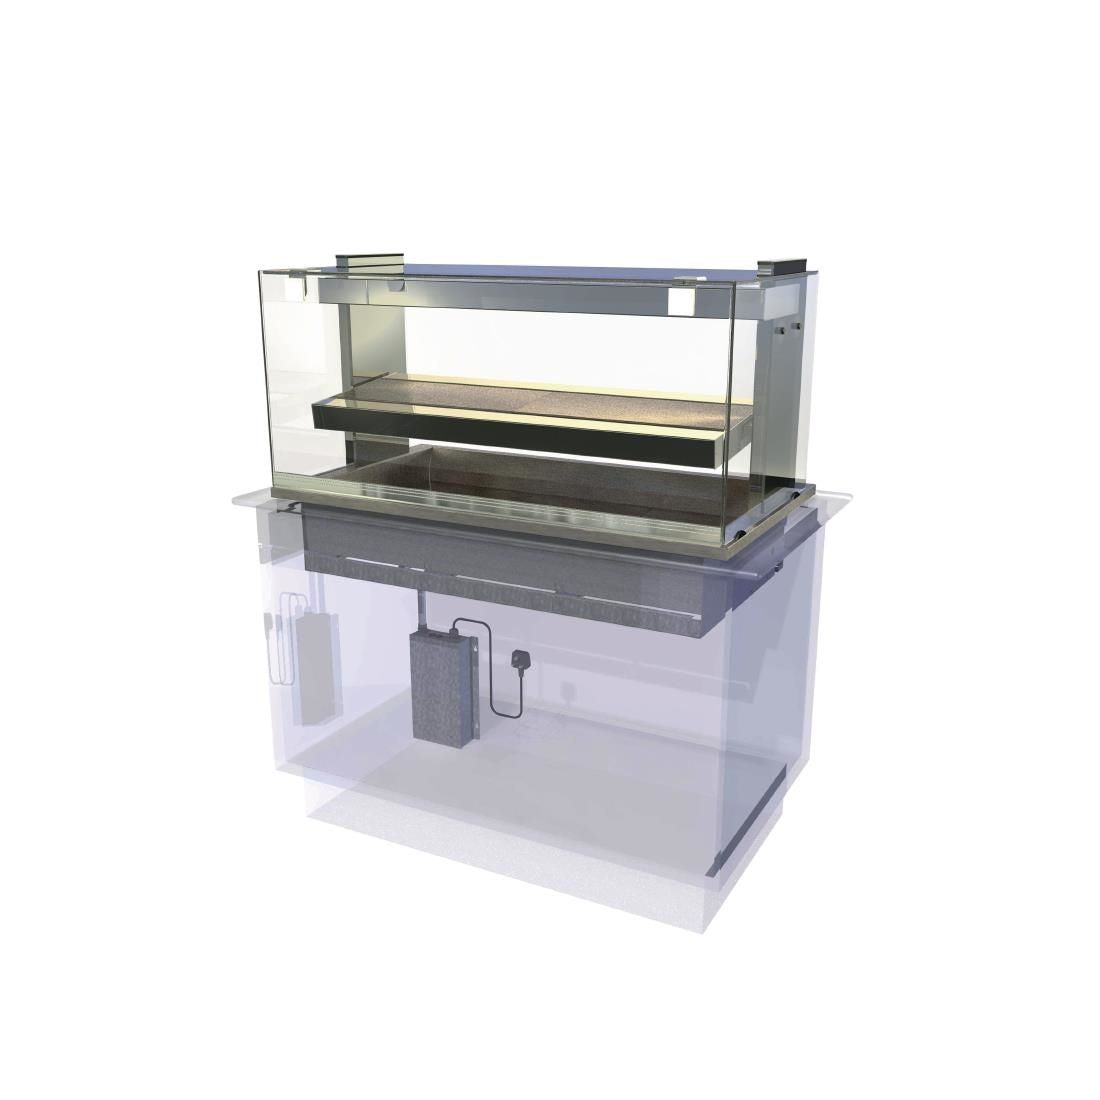 CW638 Kubus Drop In Heated Serve Over Counter KHDL4 JD Catering Equipment Solutions Ltd